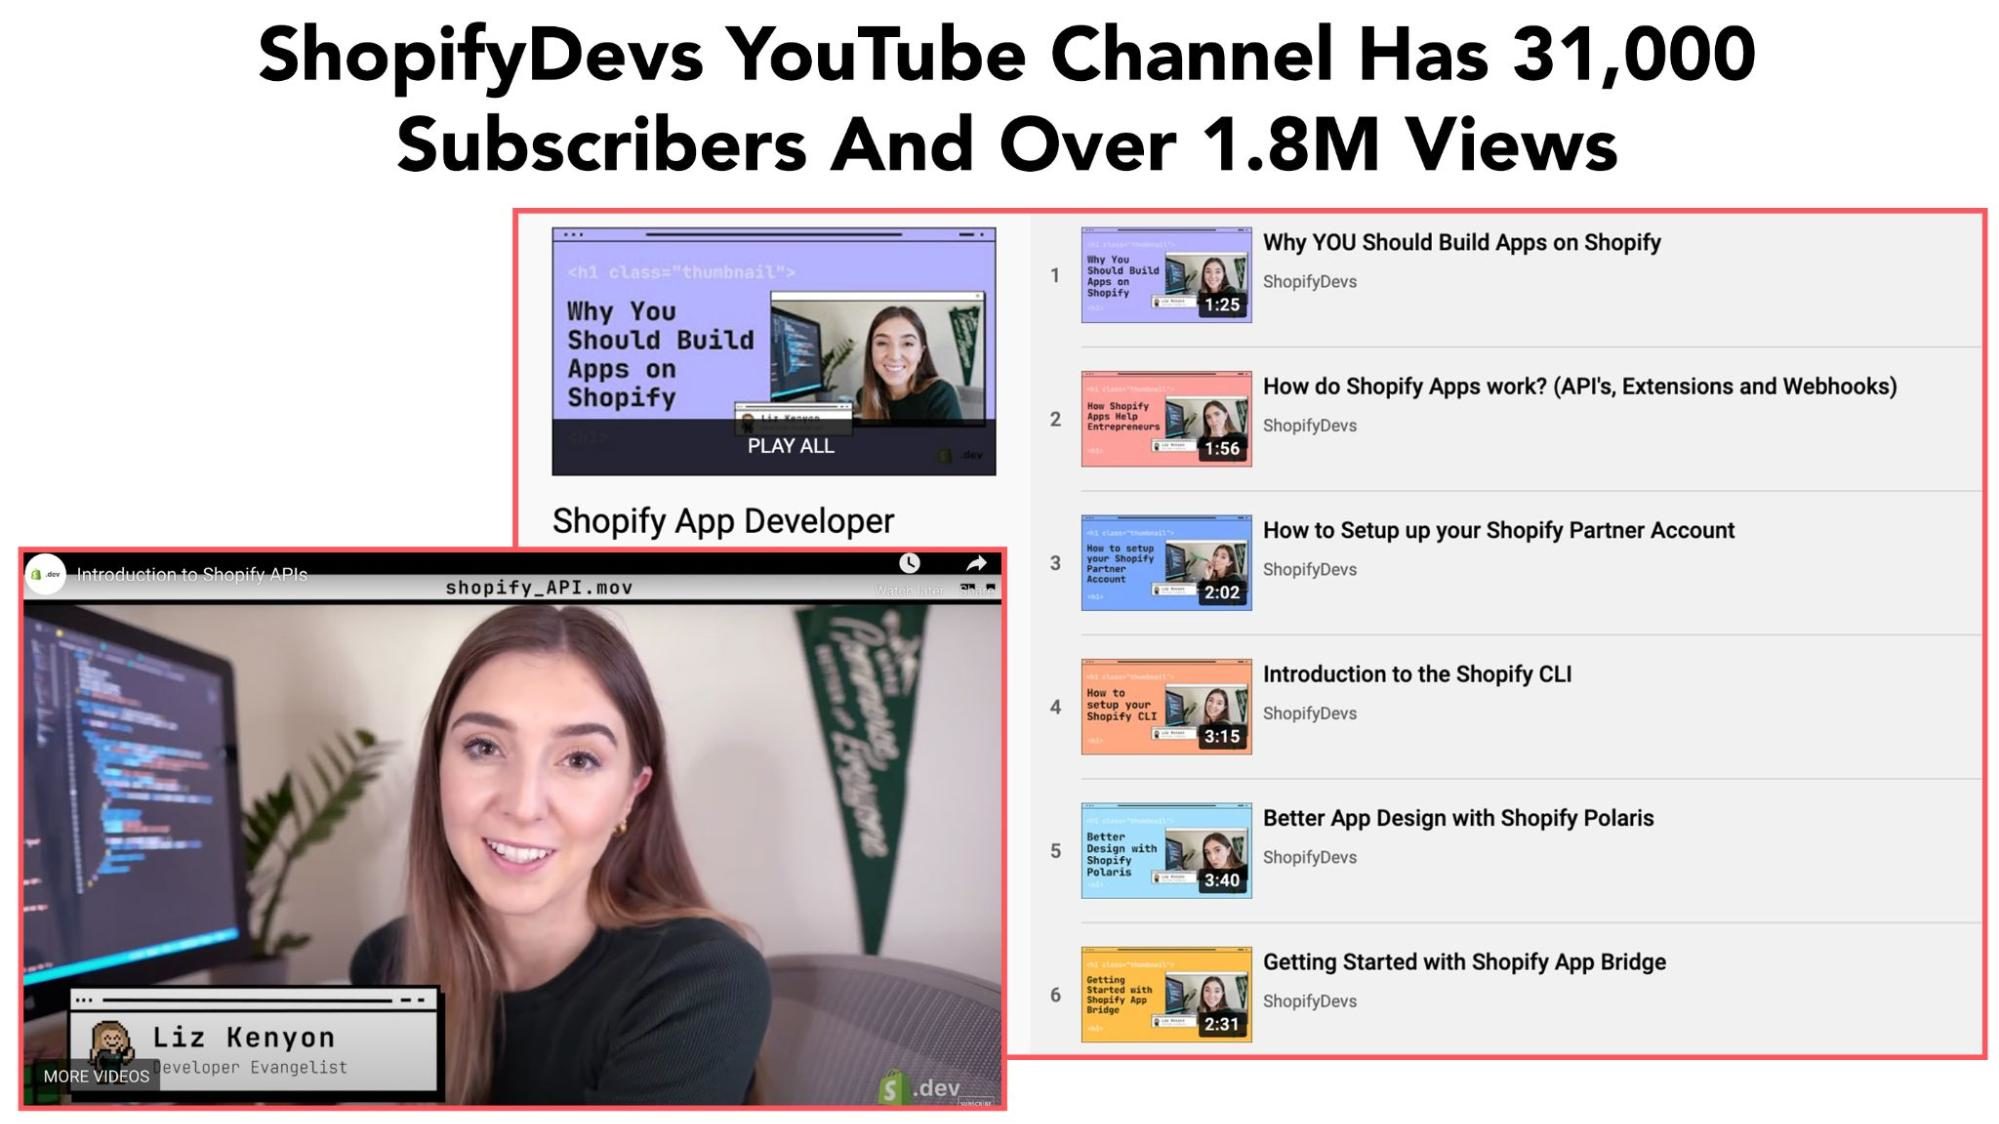 ShopifyDevs YouTube Channel has 31,000 Subscribers and Over 1.8 million views